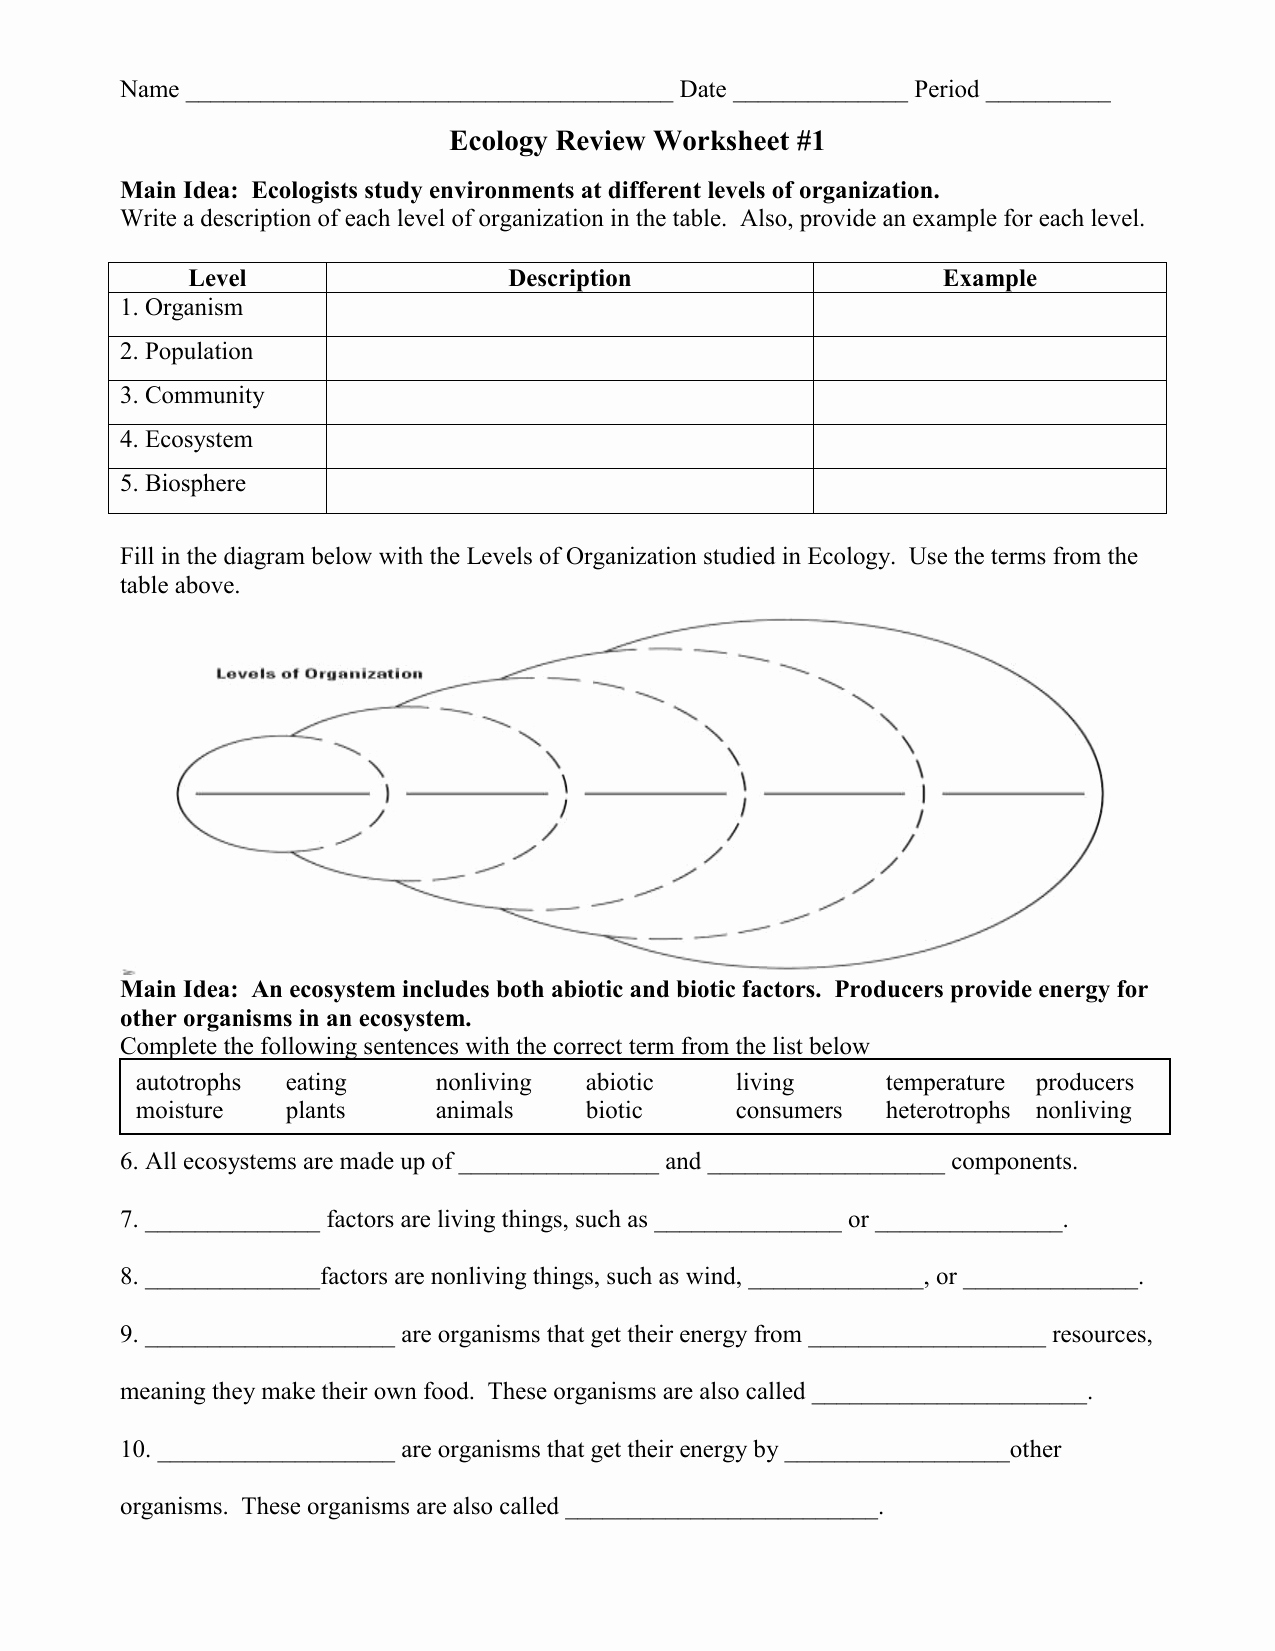 Ecology Review Worksheet 1 Inspirational Ecology Review Worksheet 1